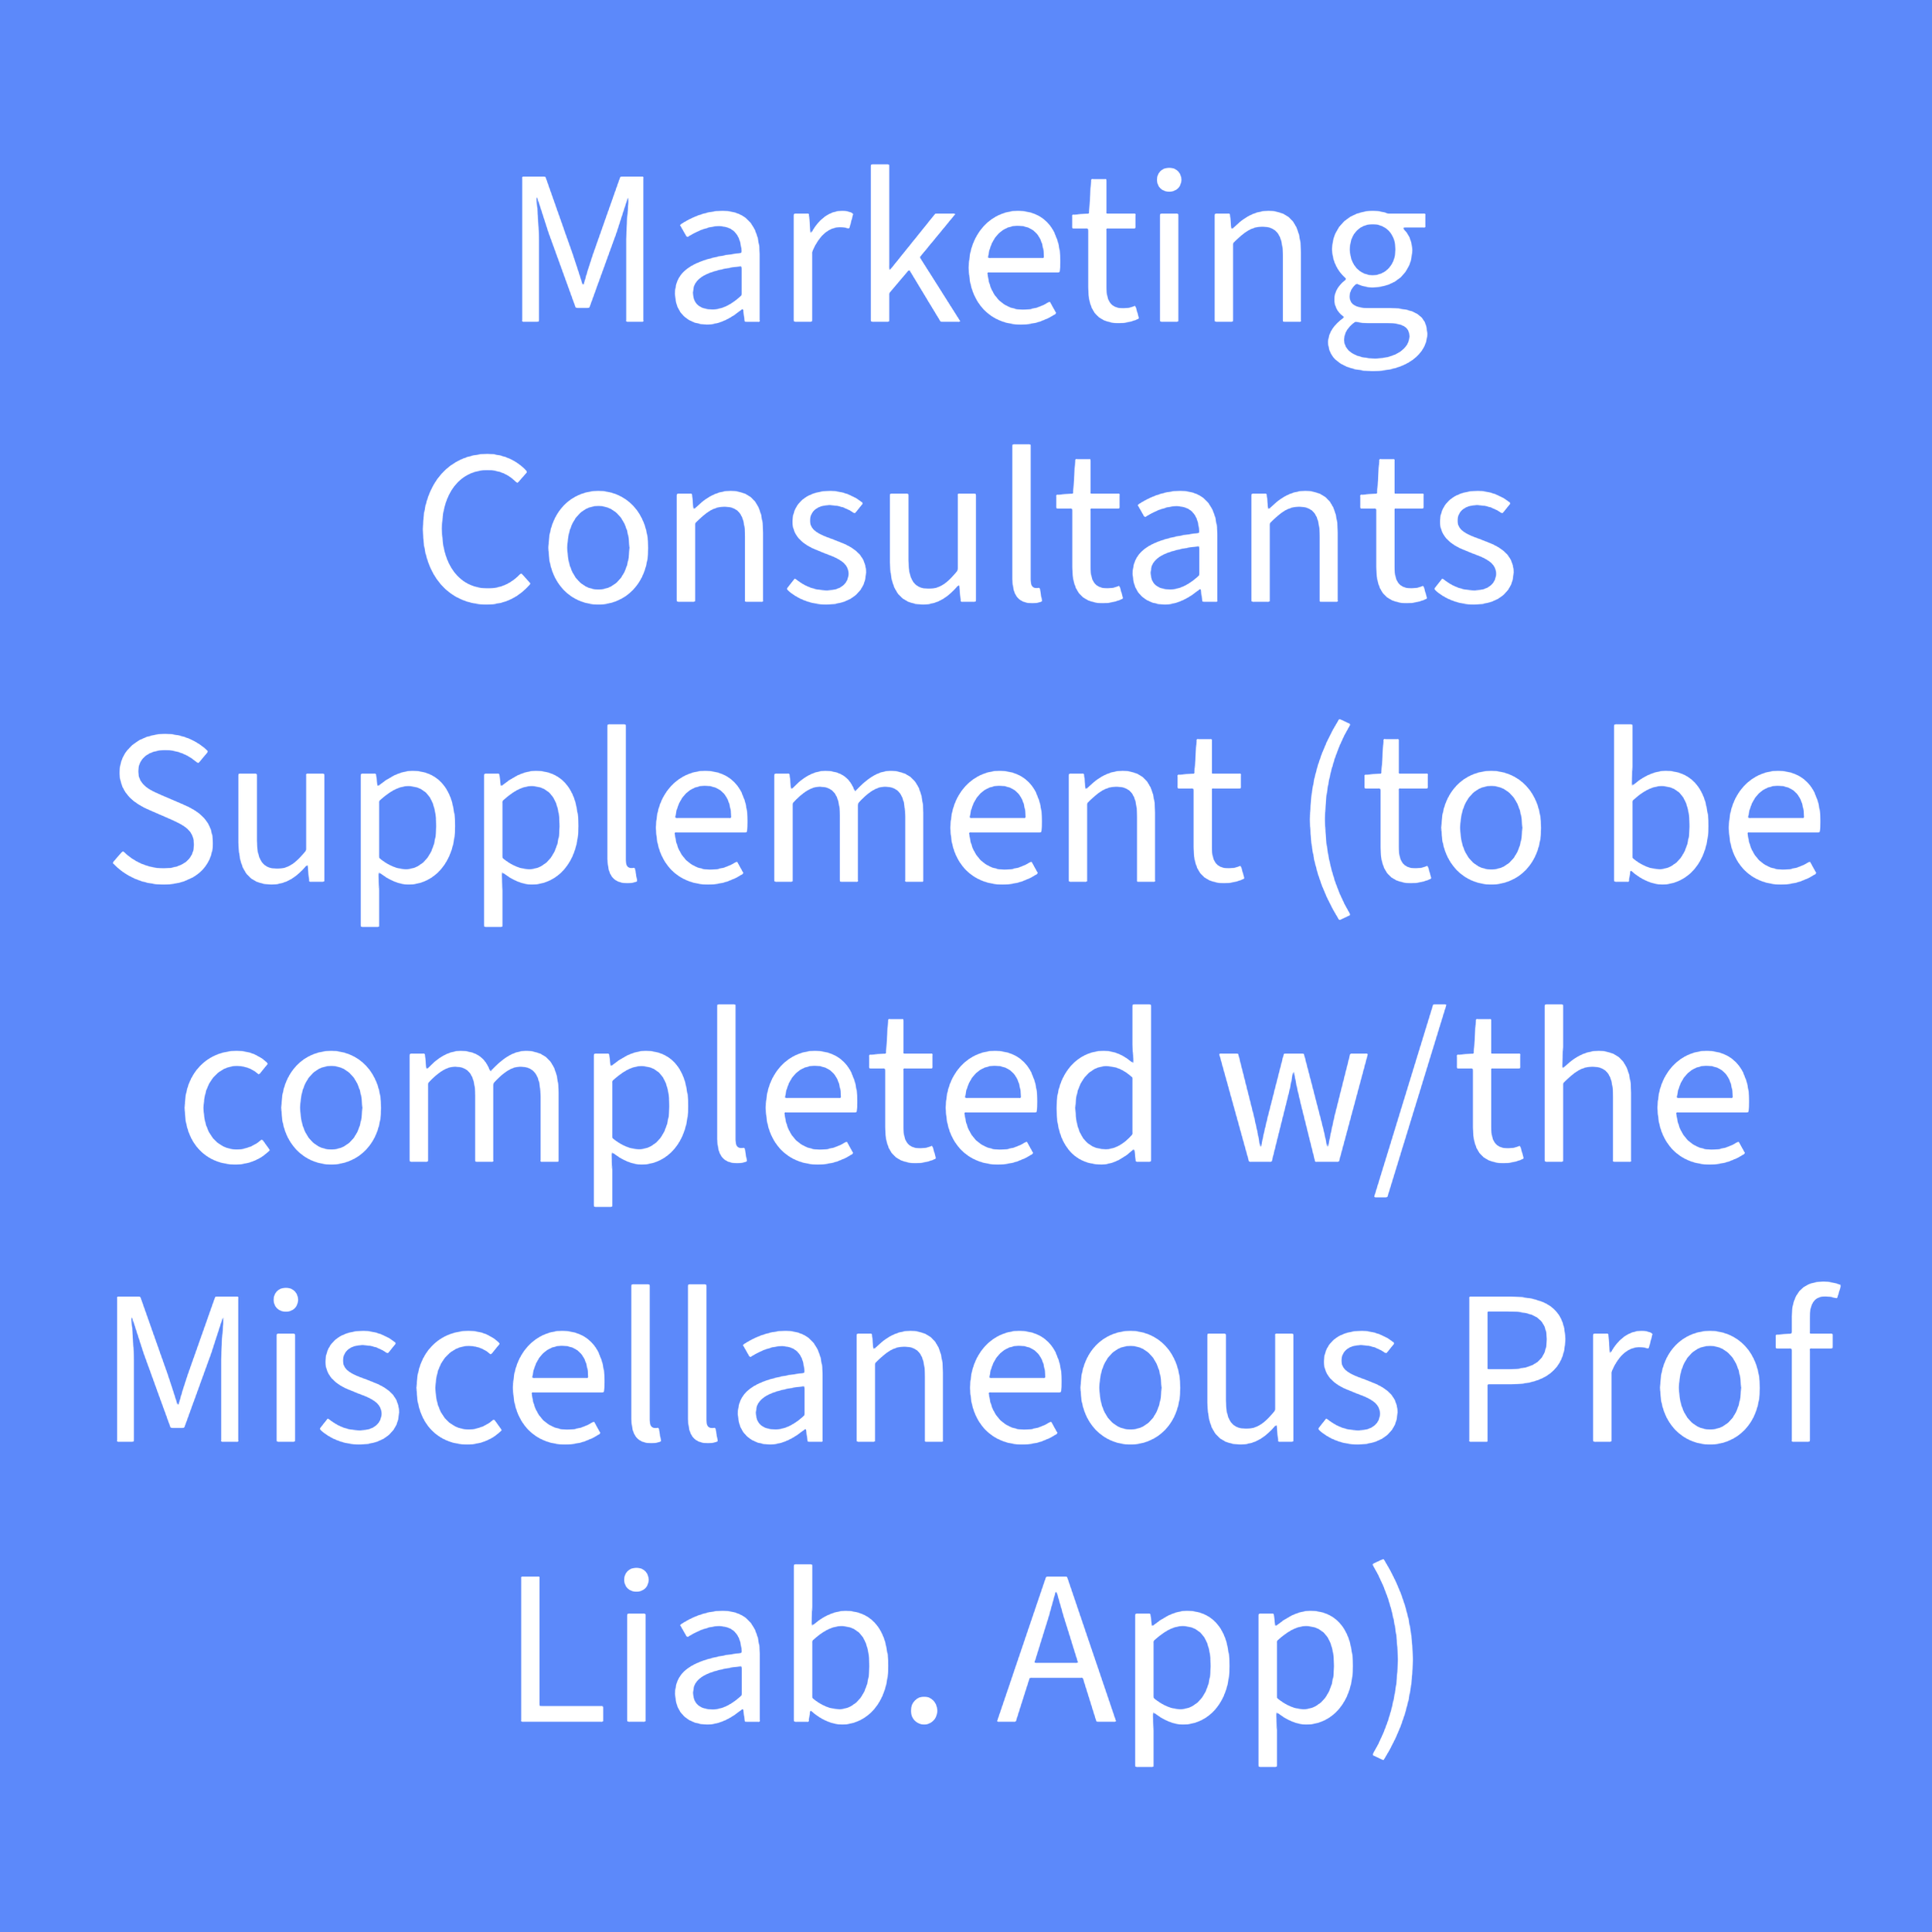 Misc. Professional Liability Apps-3-Marketing Consultants Supplement .png